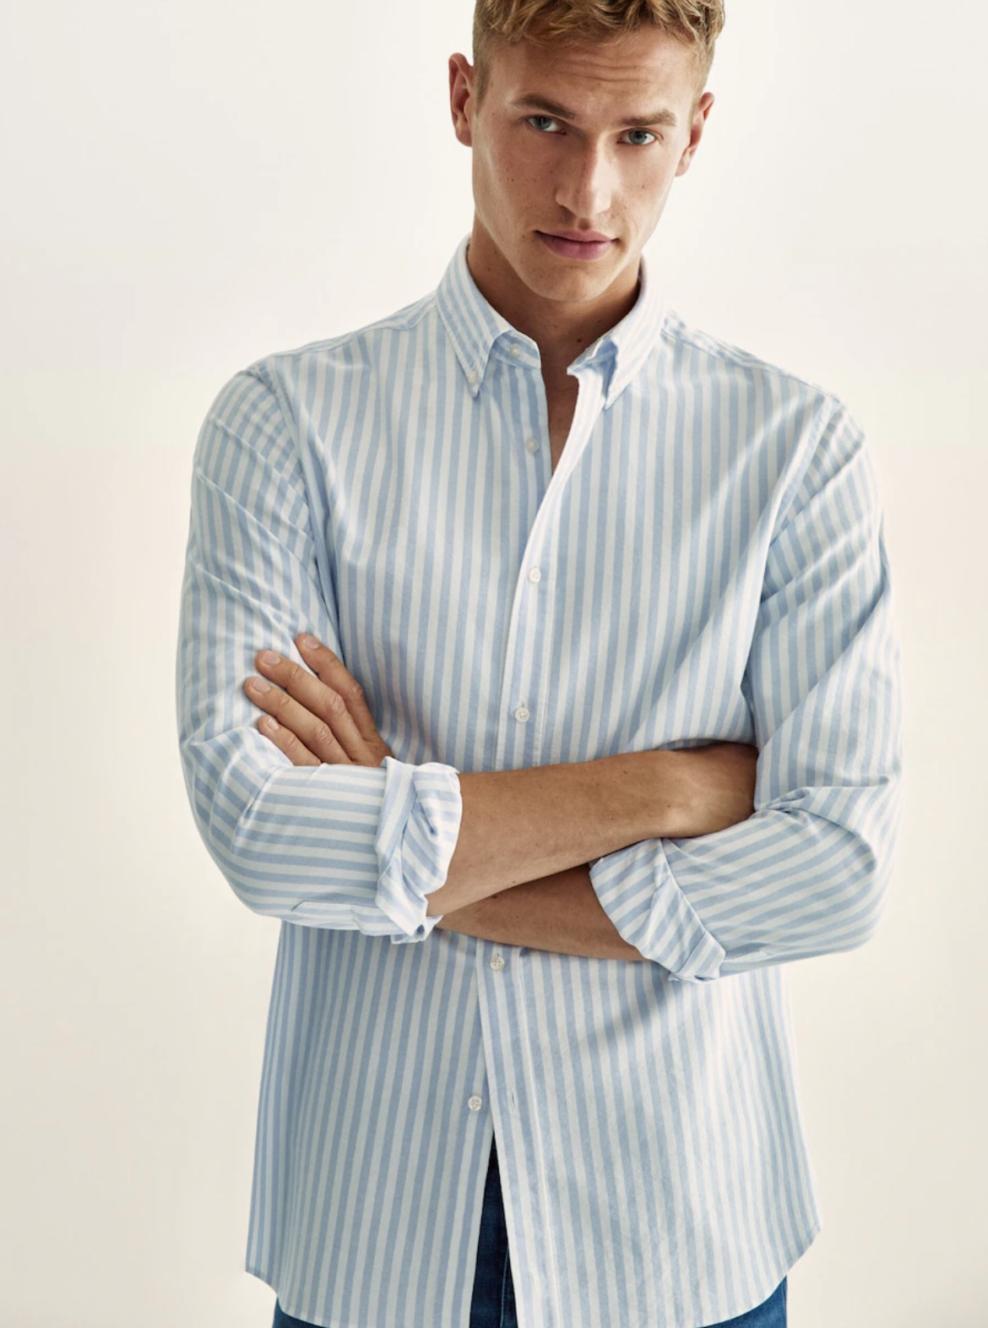 What would I buy from Massimo Dutti? – Permanent Style